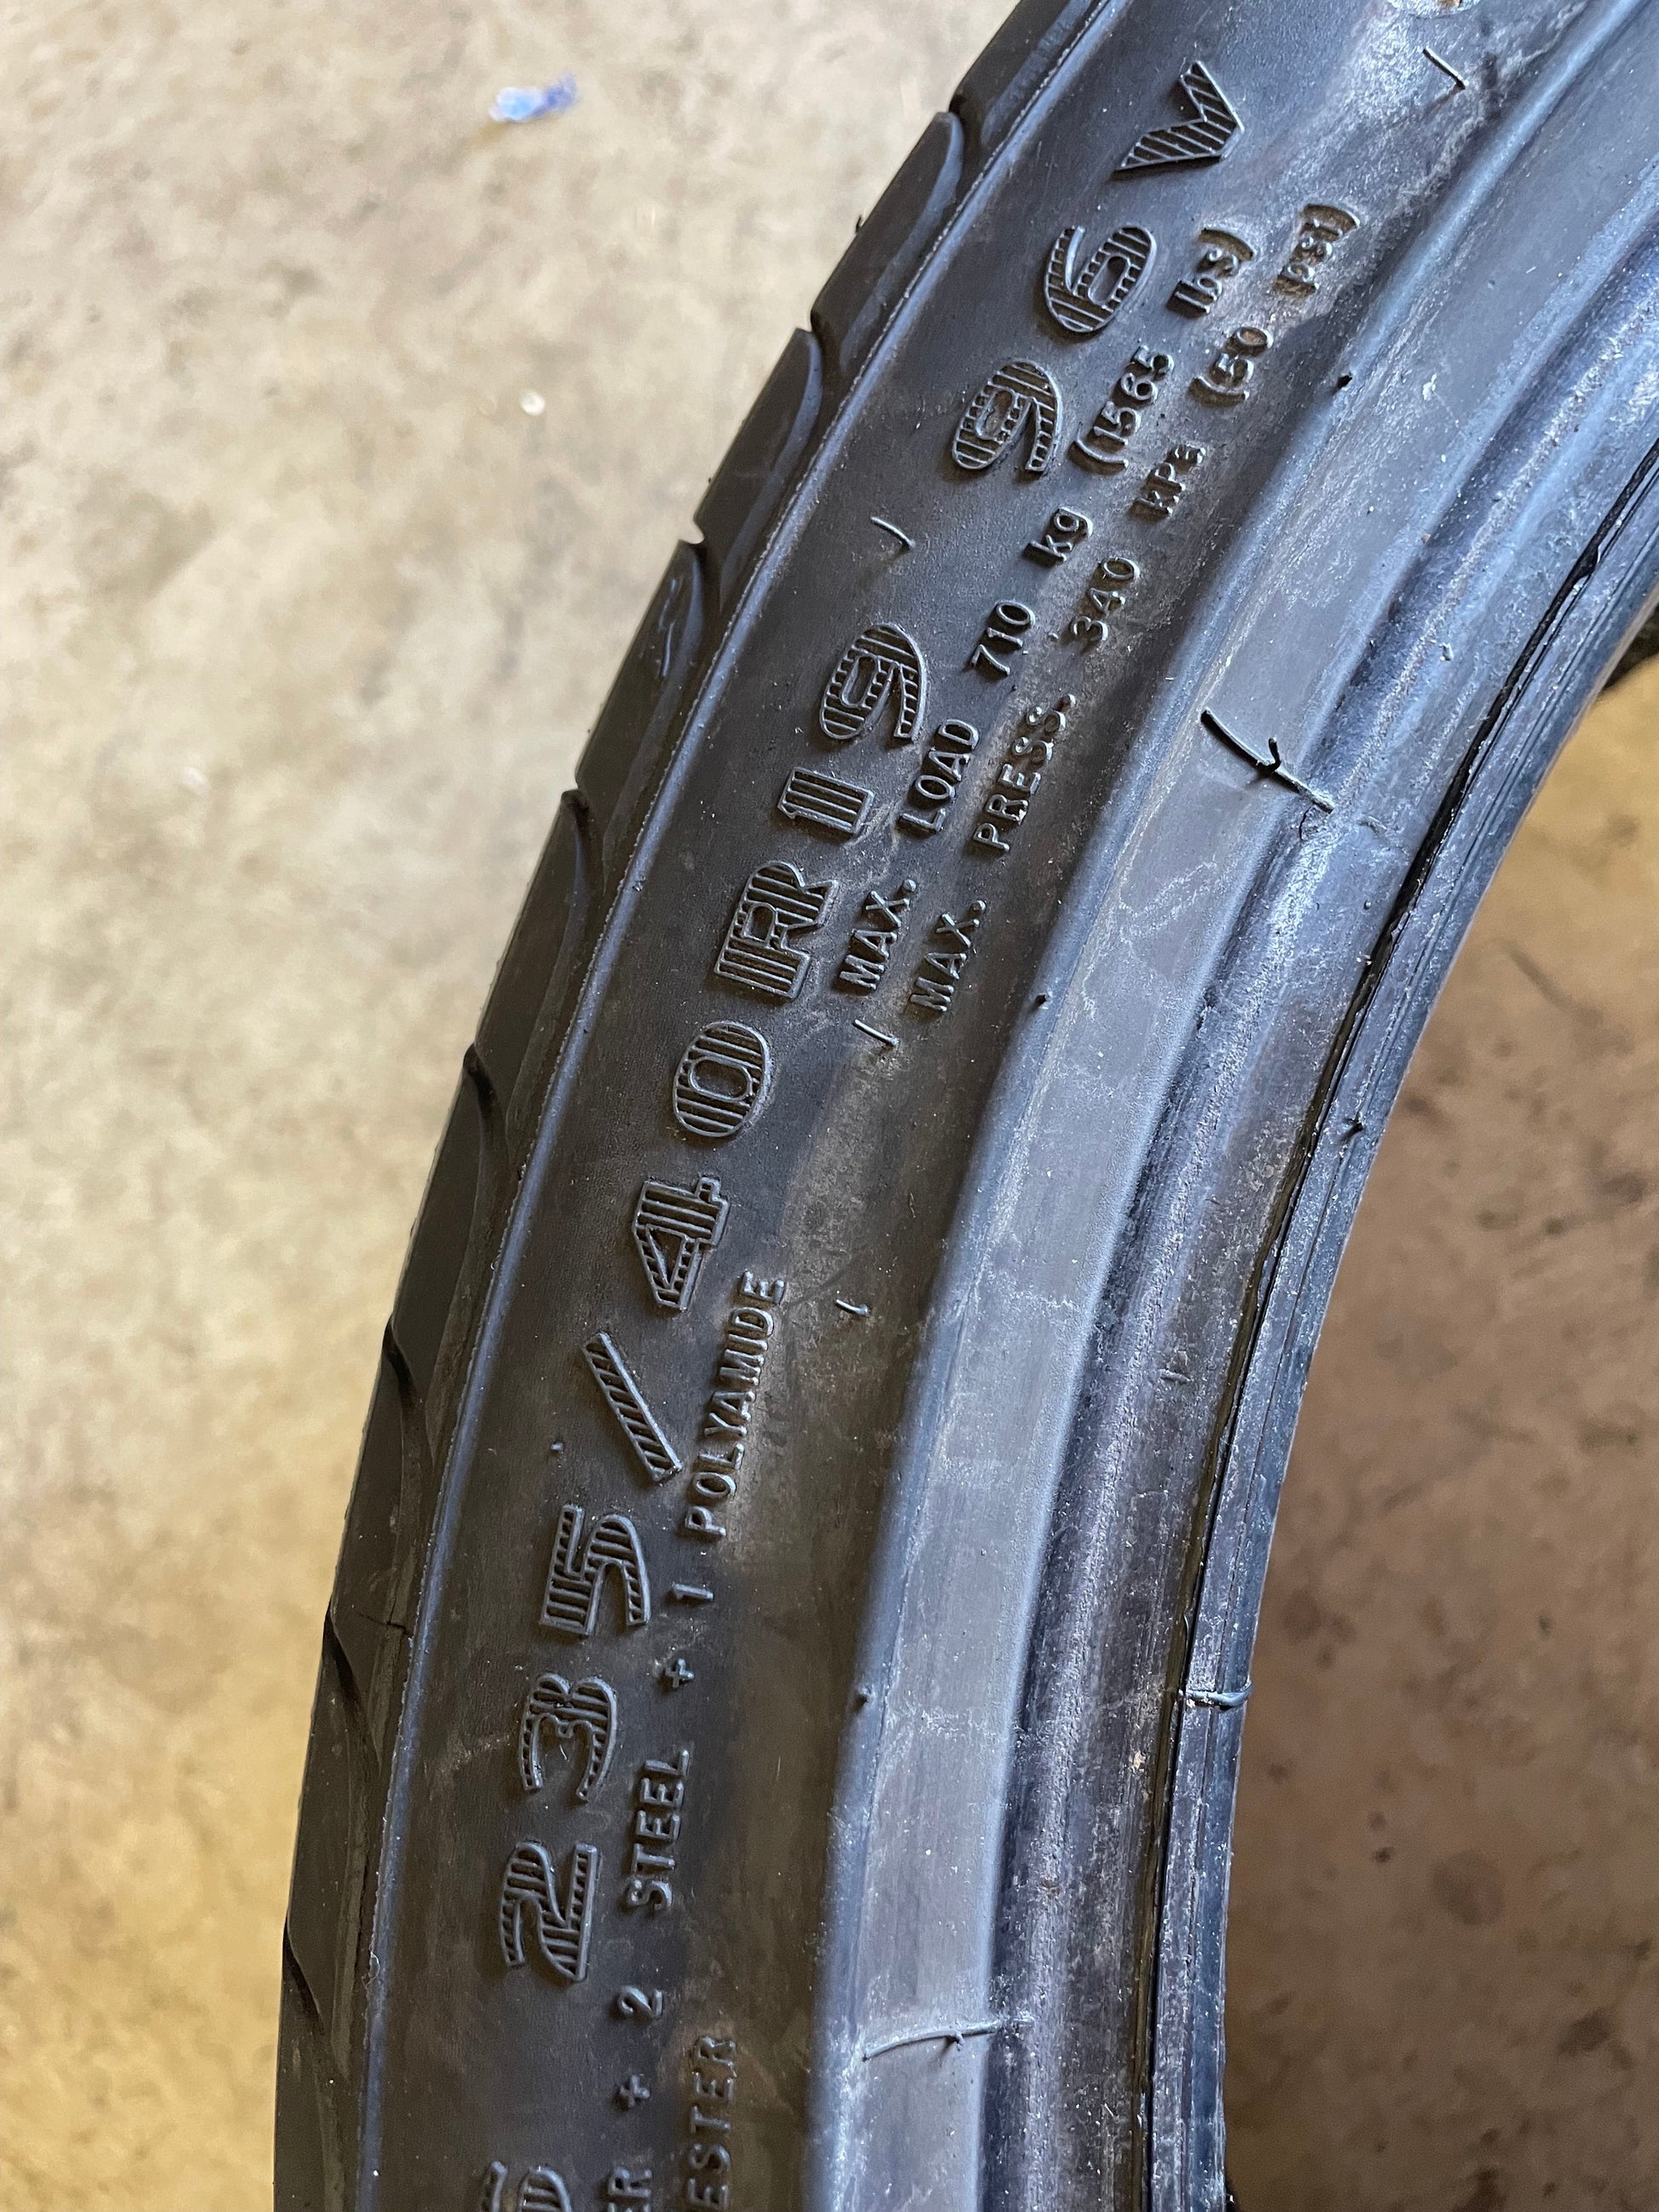 SINGLE 235/40R19 Goodyear Eagle Touring 96V XL - Used Tires